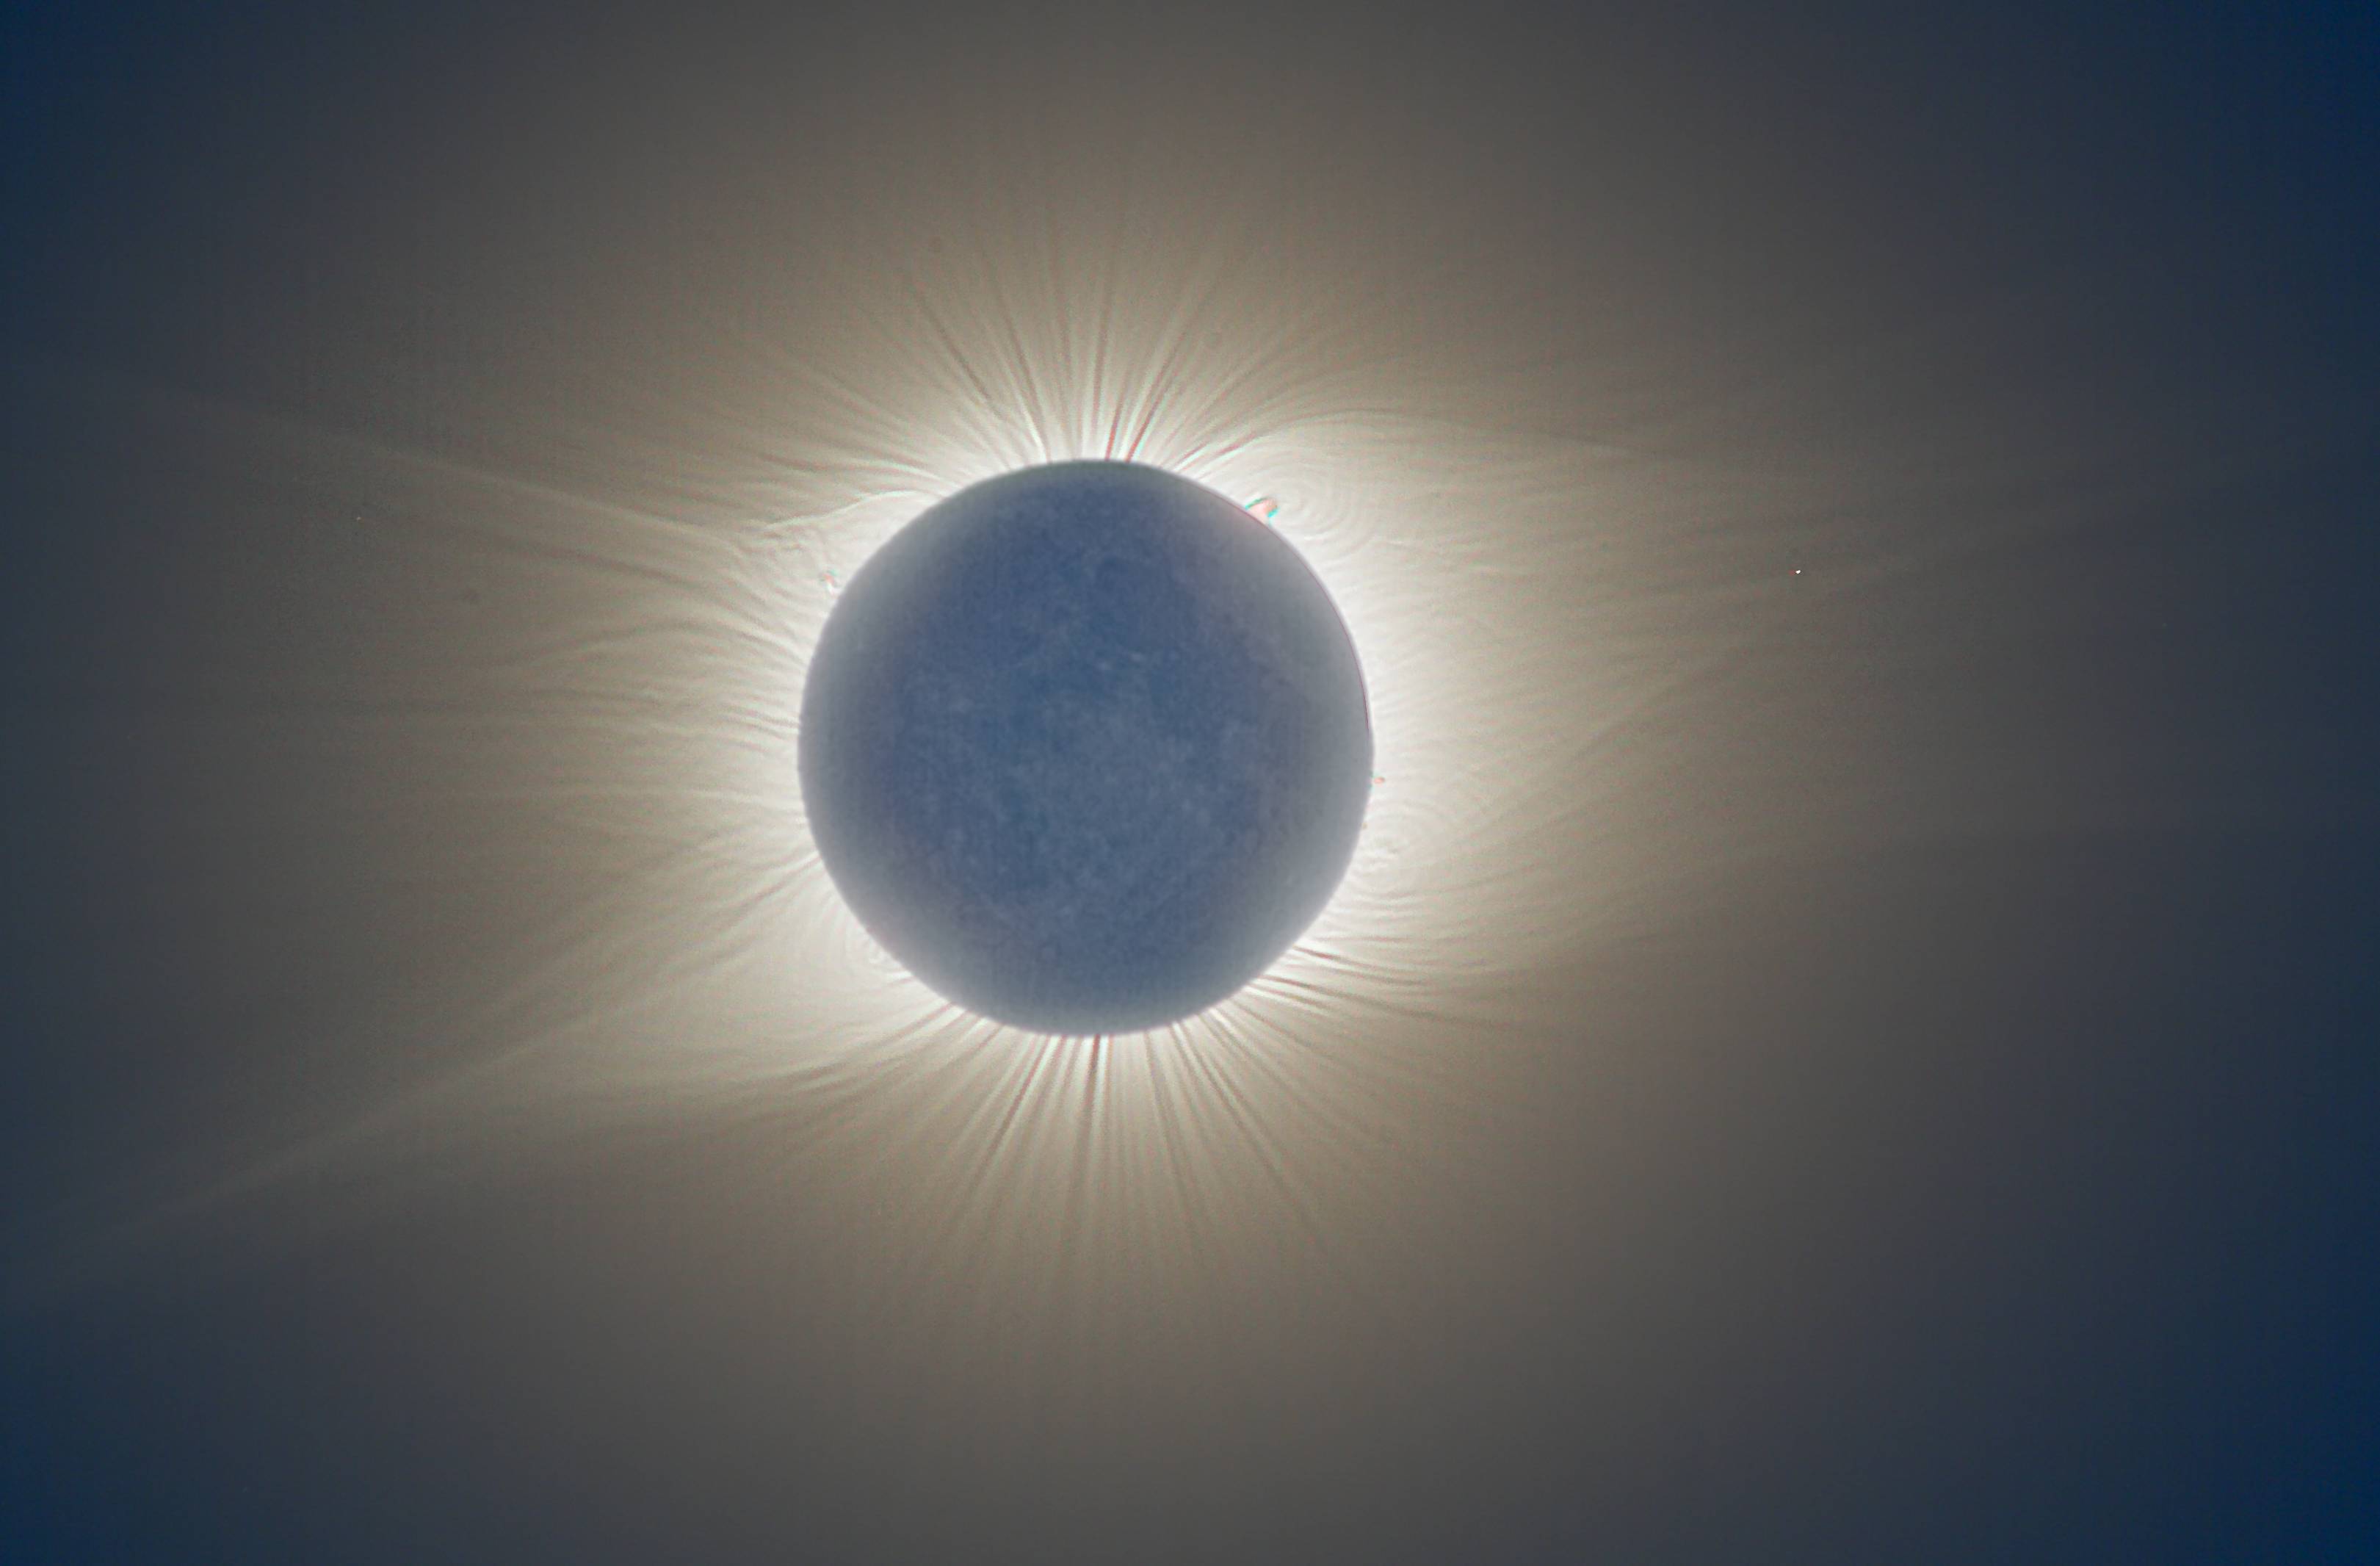 apod-2008-august-8-the-crown-of-the-sun